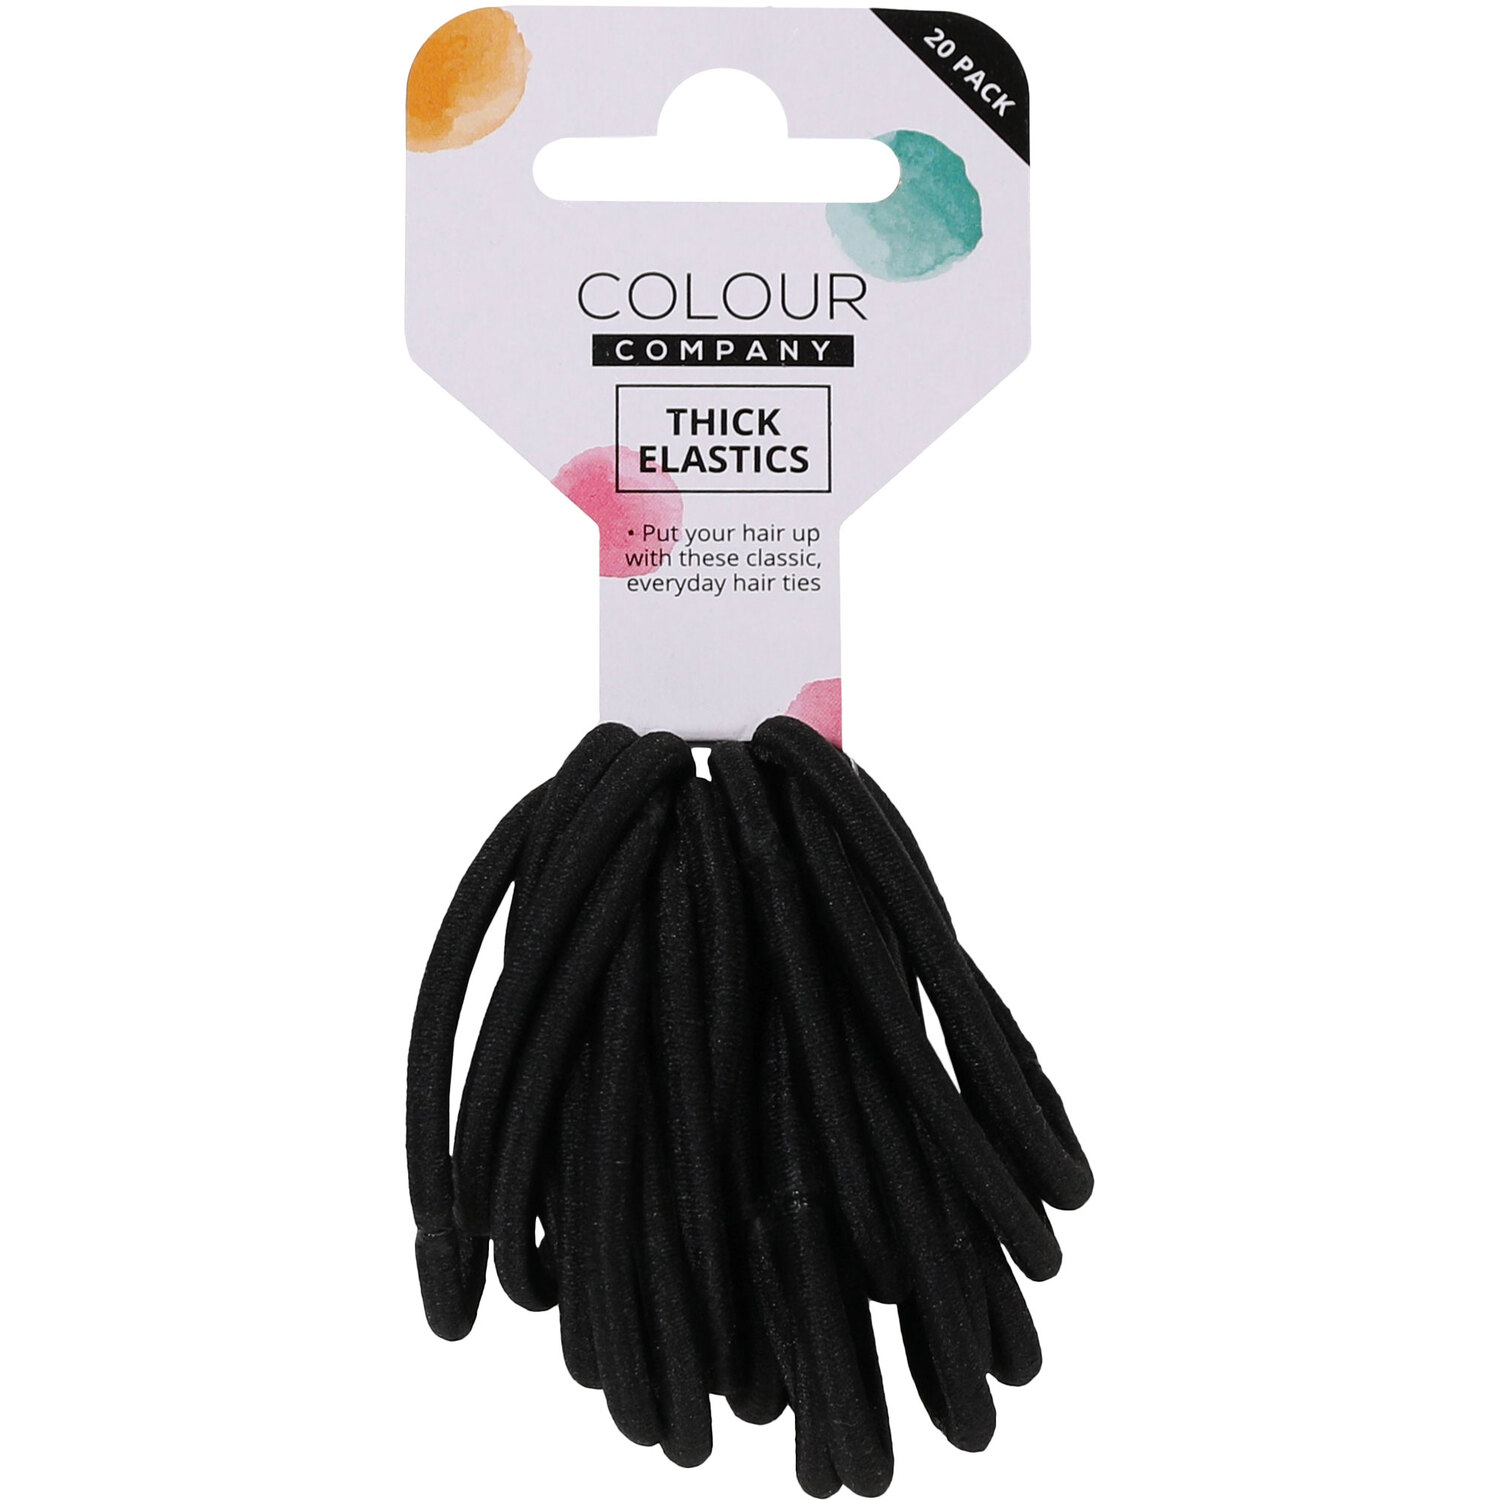 Colour Company Black Thick Elastic Hairbands 20 Pack Image